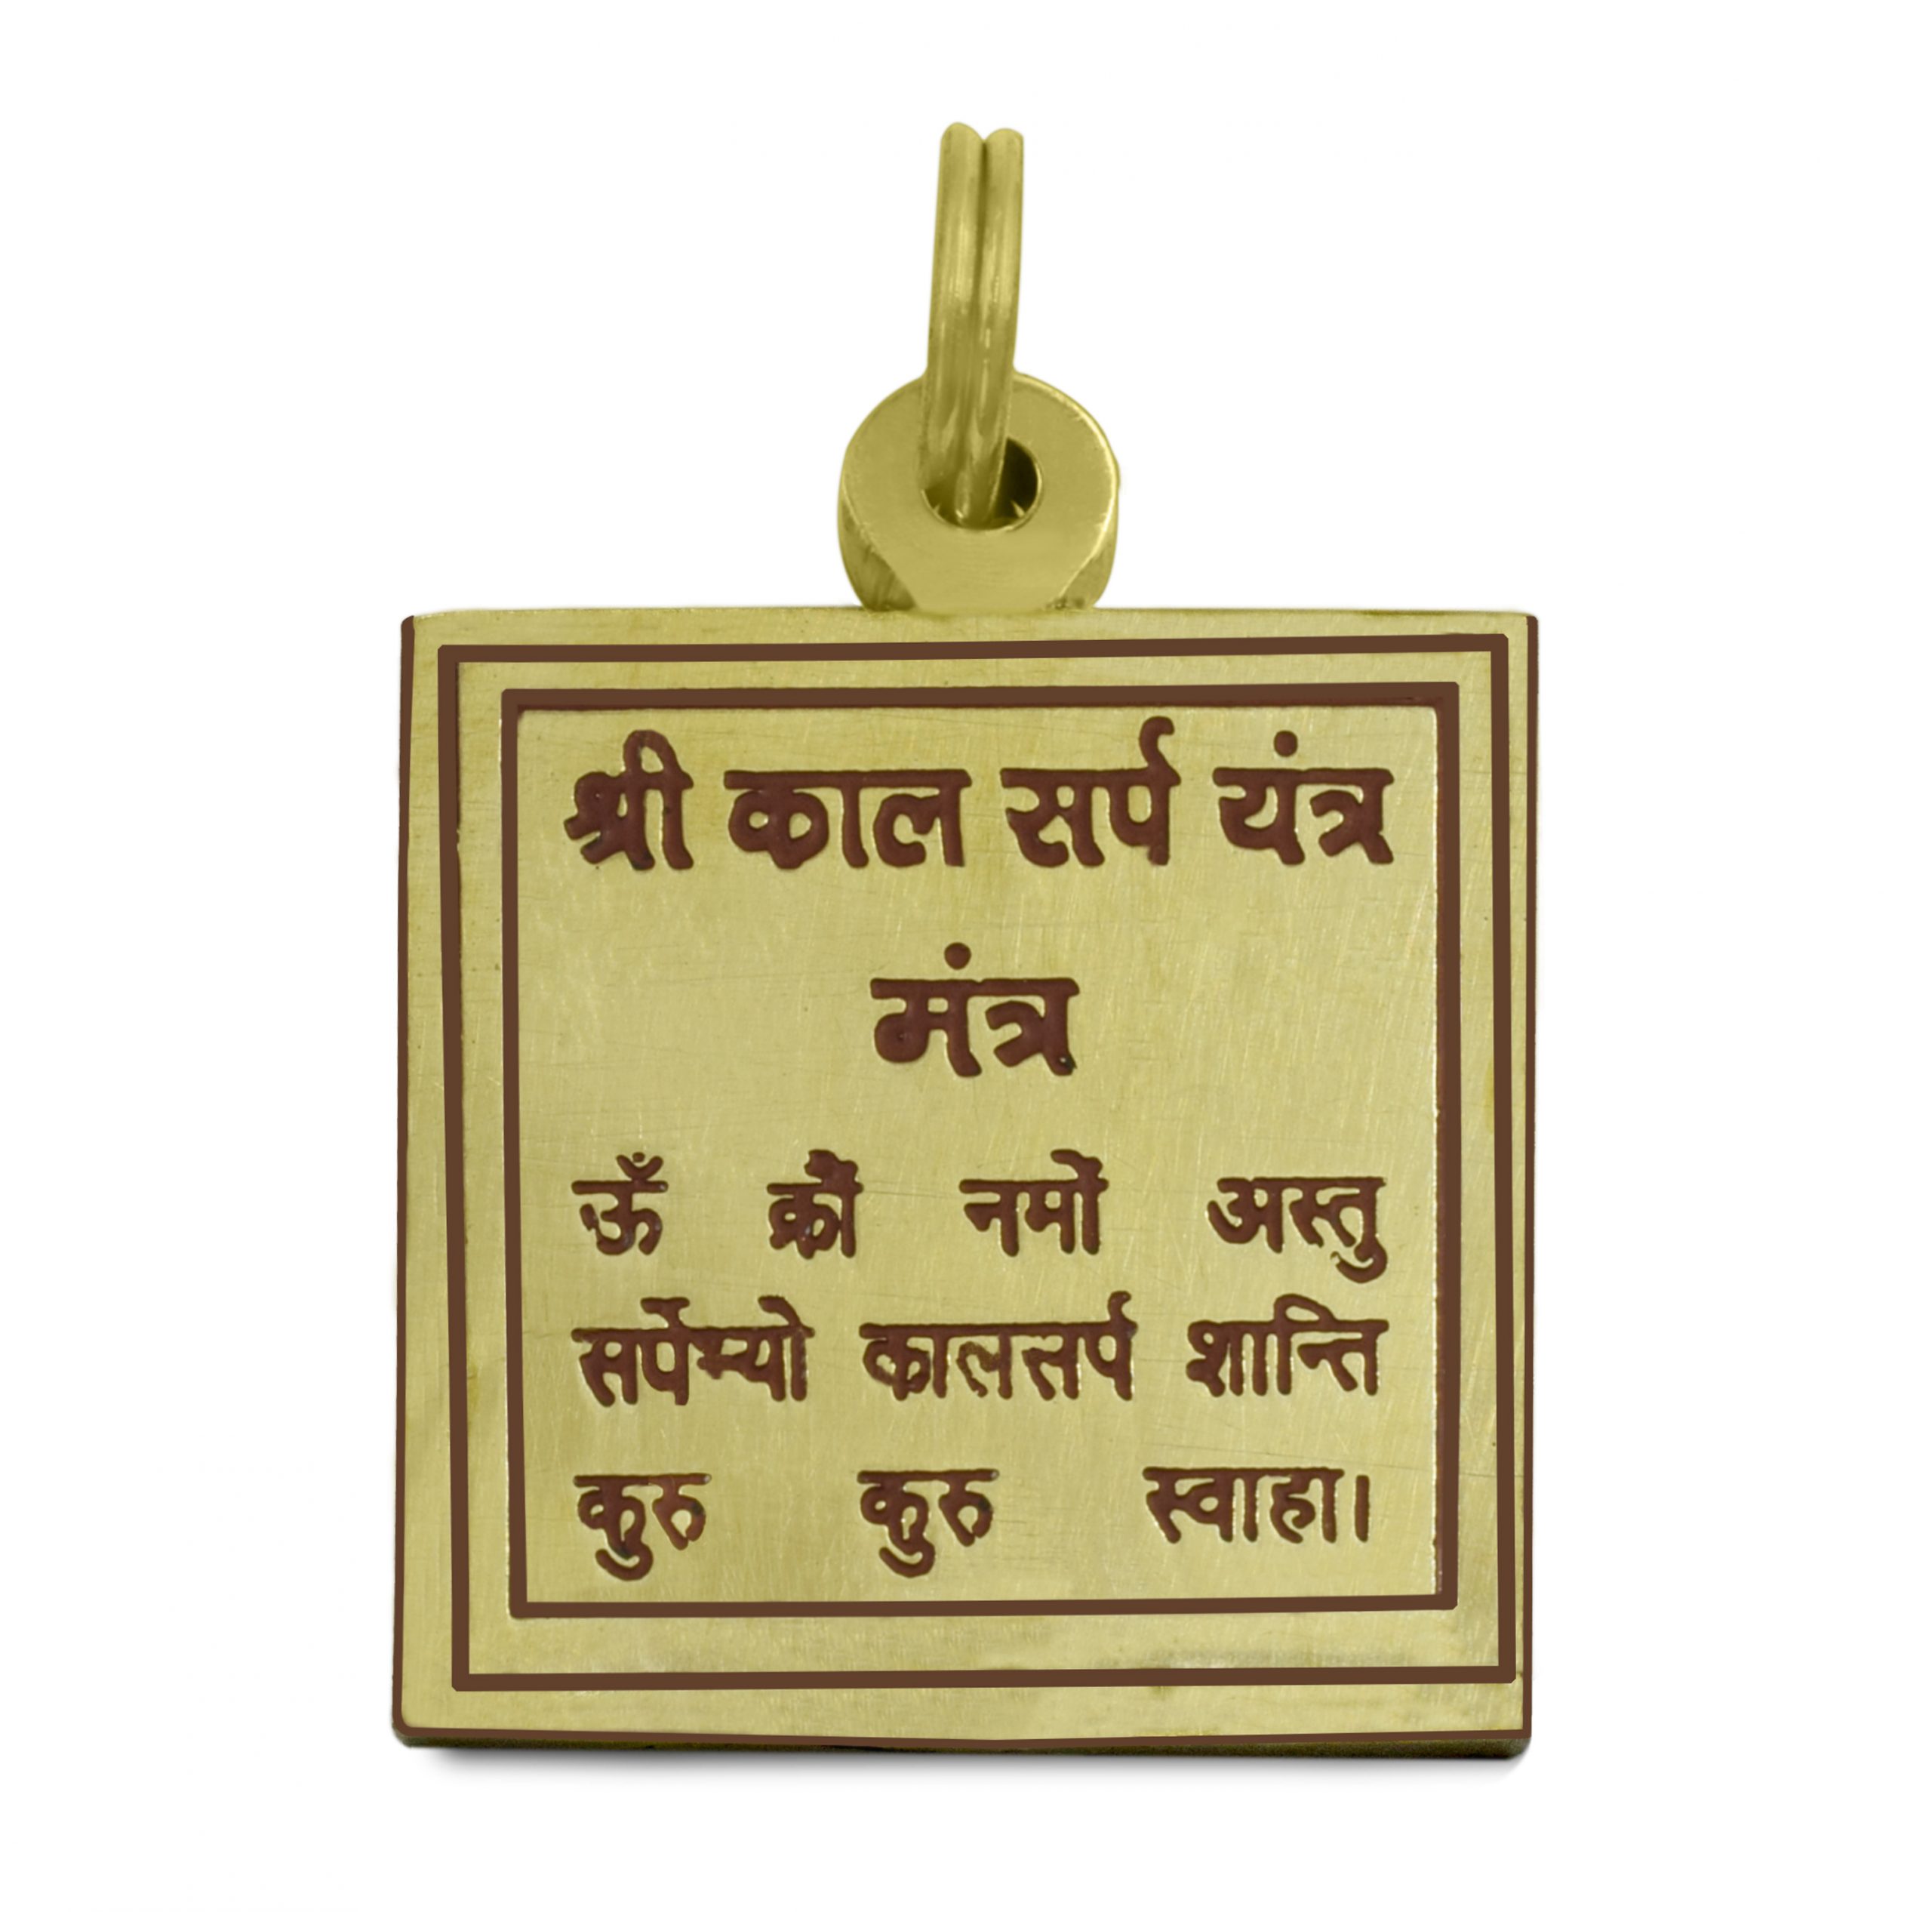 Buy Authentic Kaal Sarp Dosh Removal Ring to wear | ReligiousKart